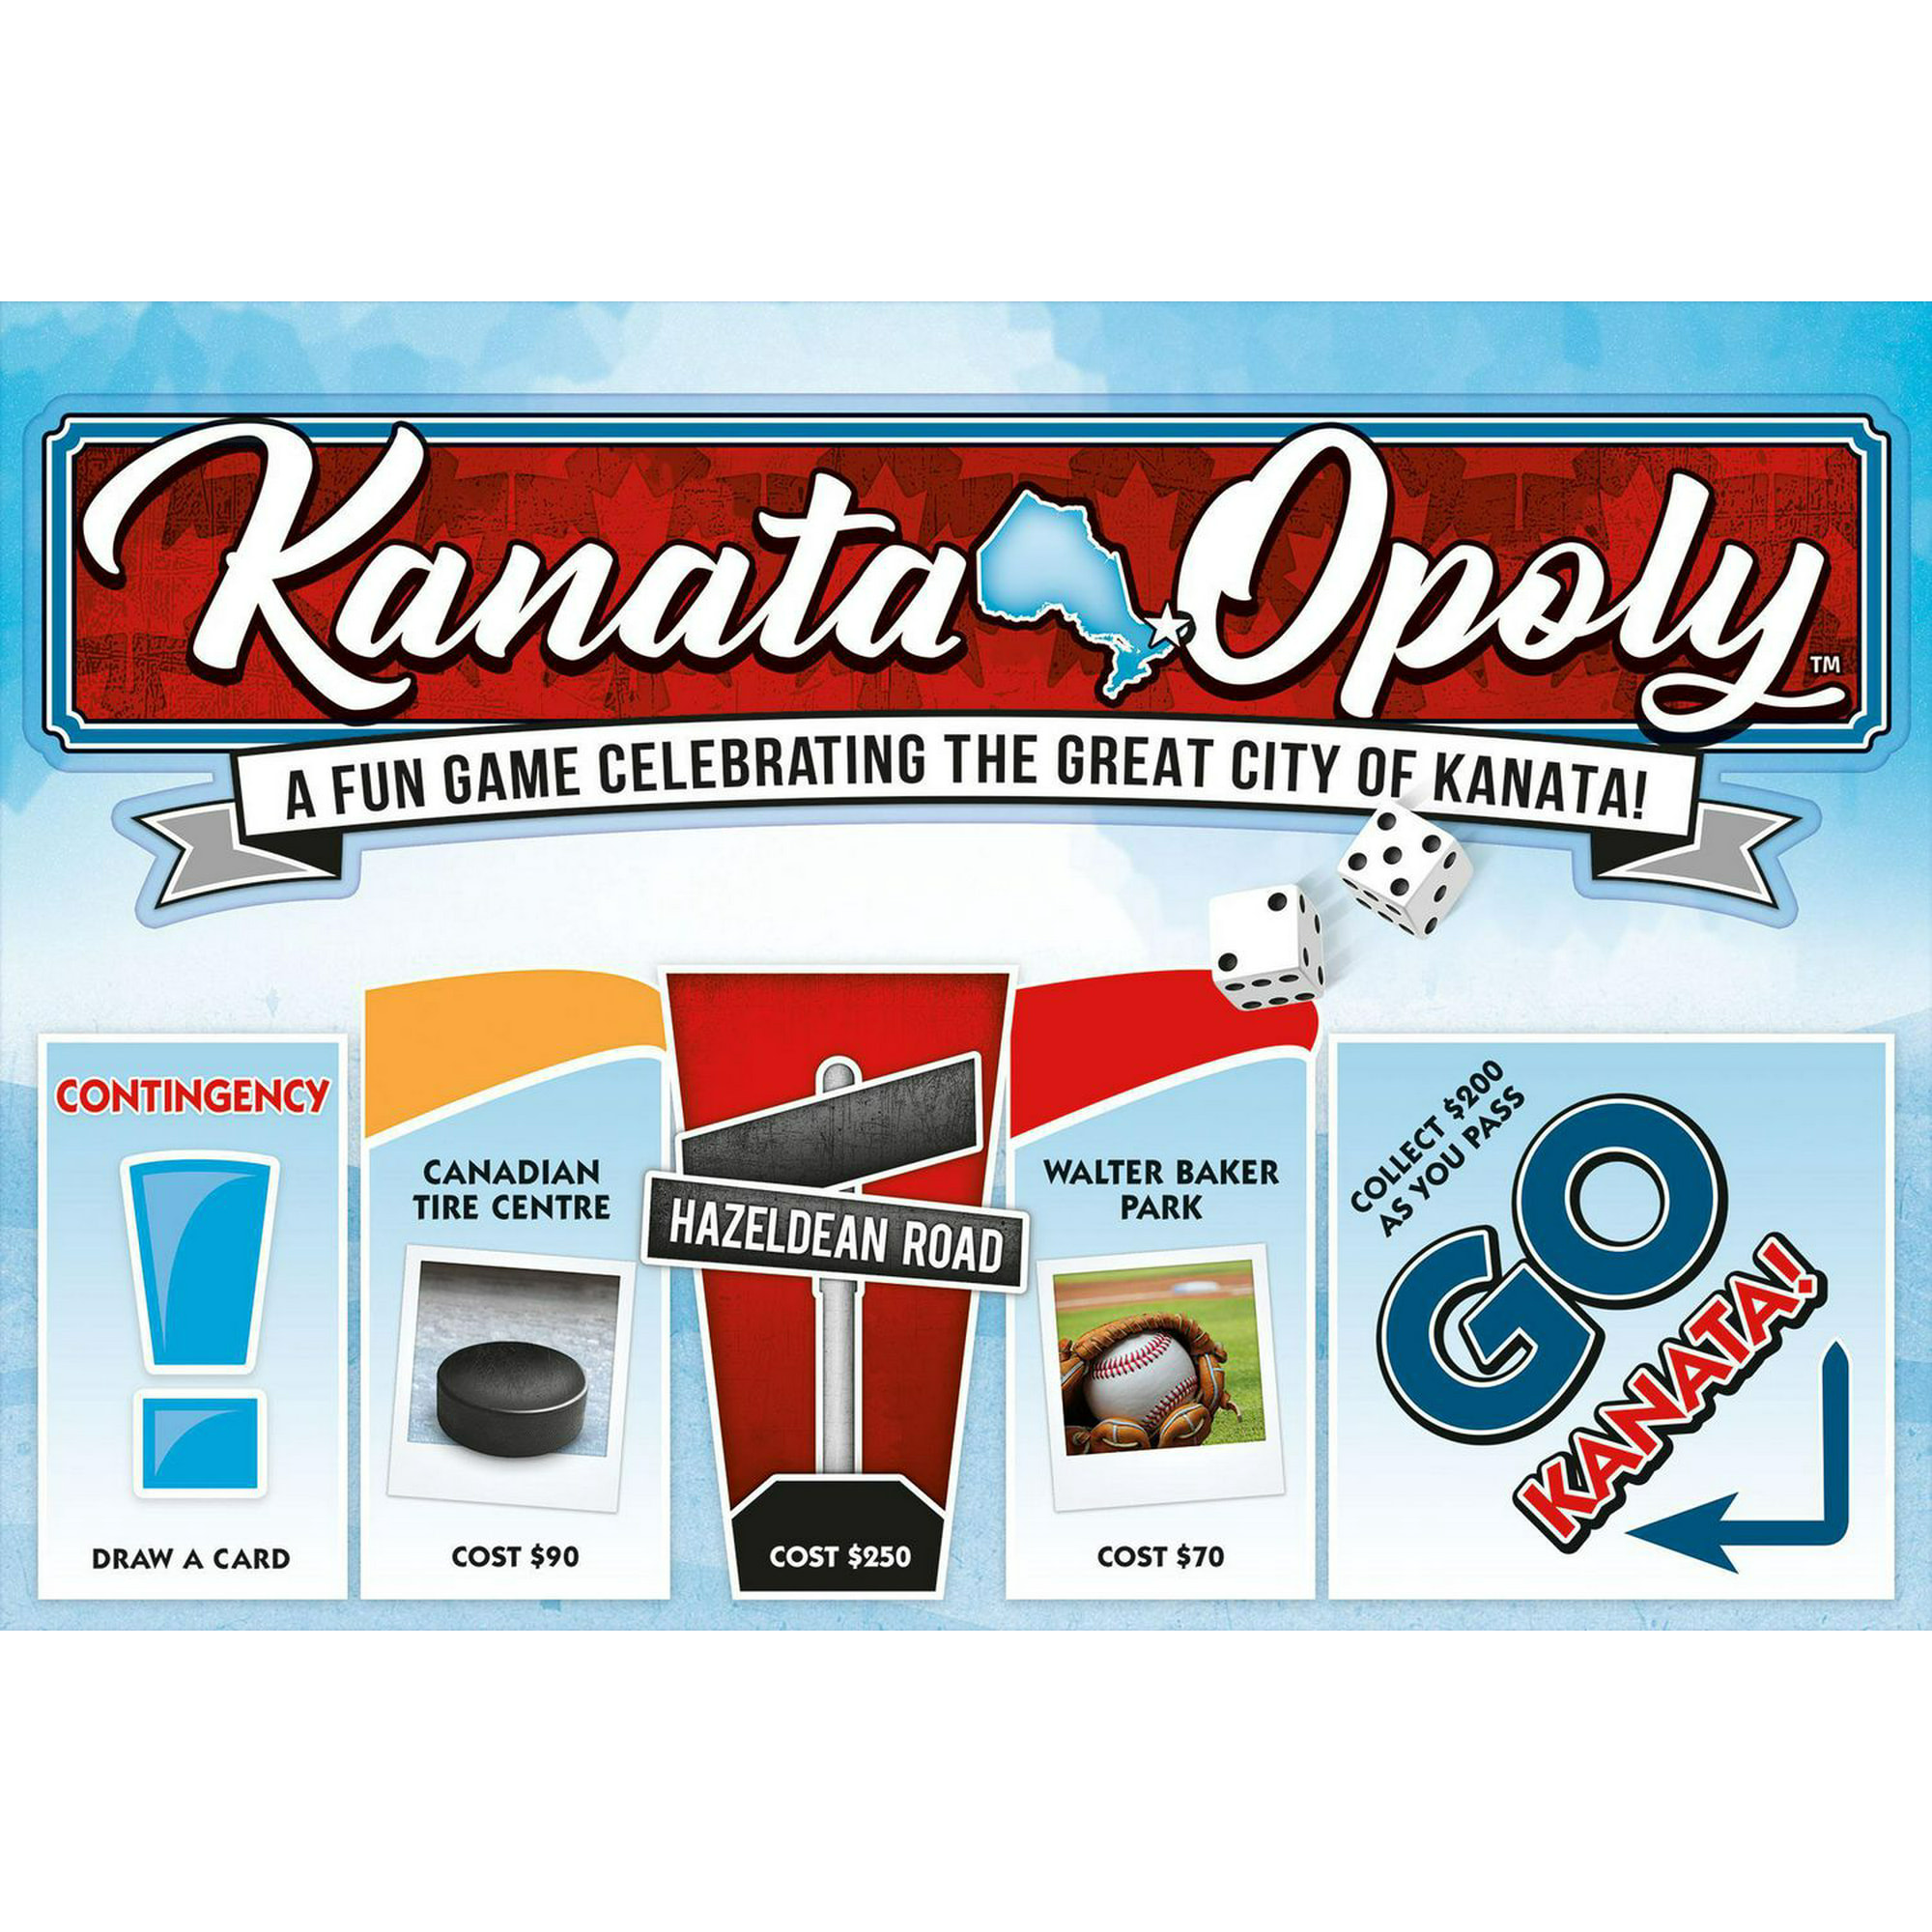 Buy Fishin'-Opoly Online With Canadian Pricing - Urban Nature Store